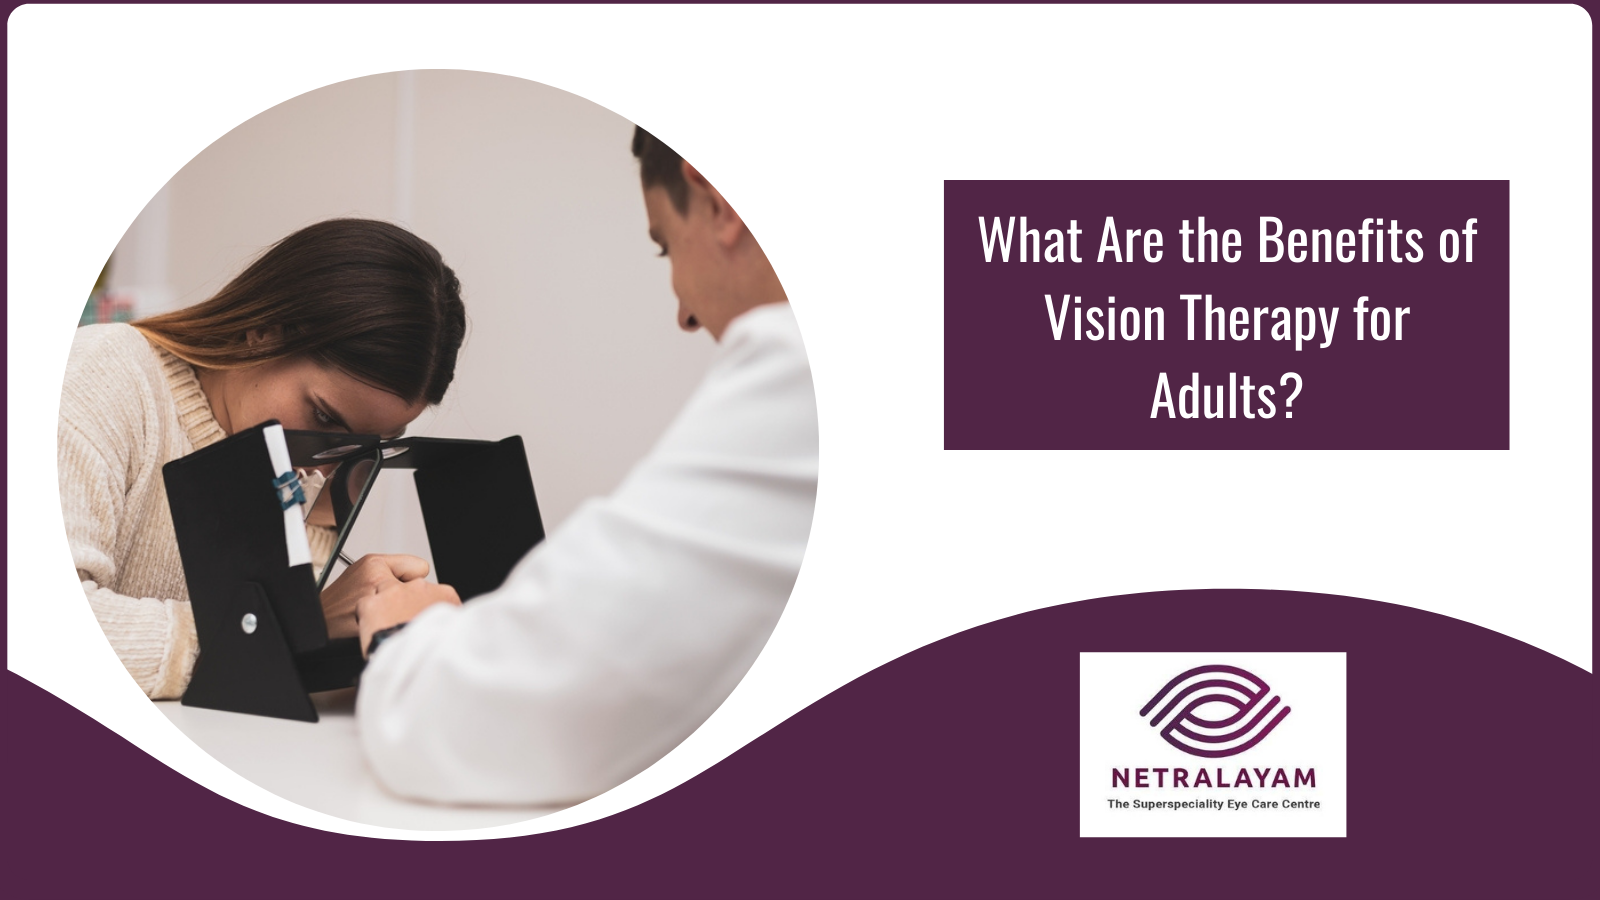 What Are the Benefits of Vision Therapy for Adults?